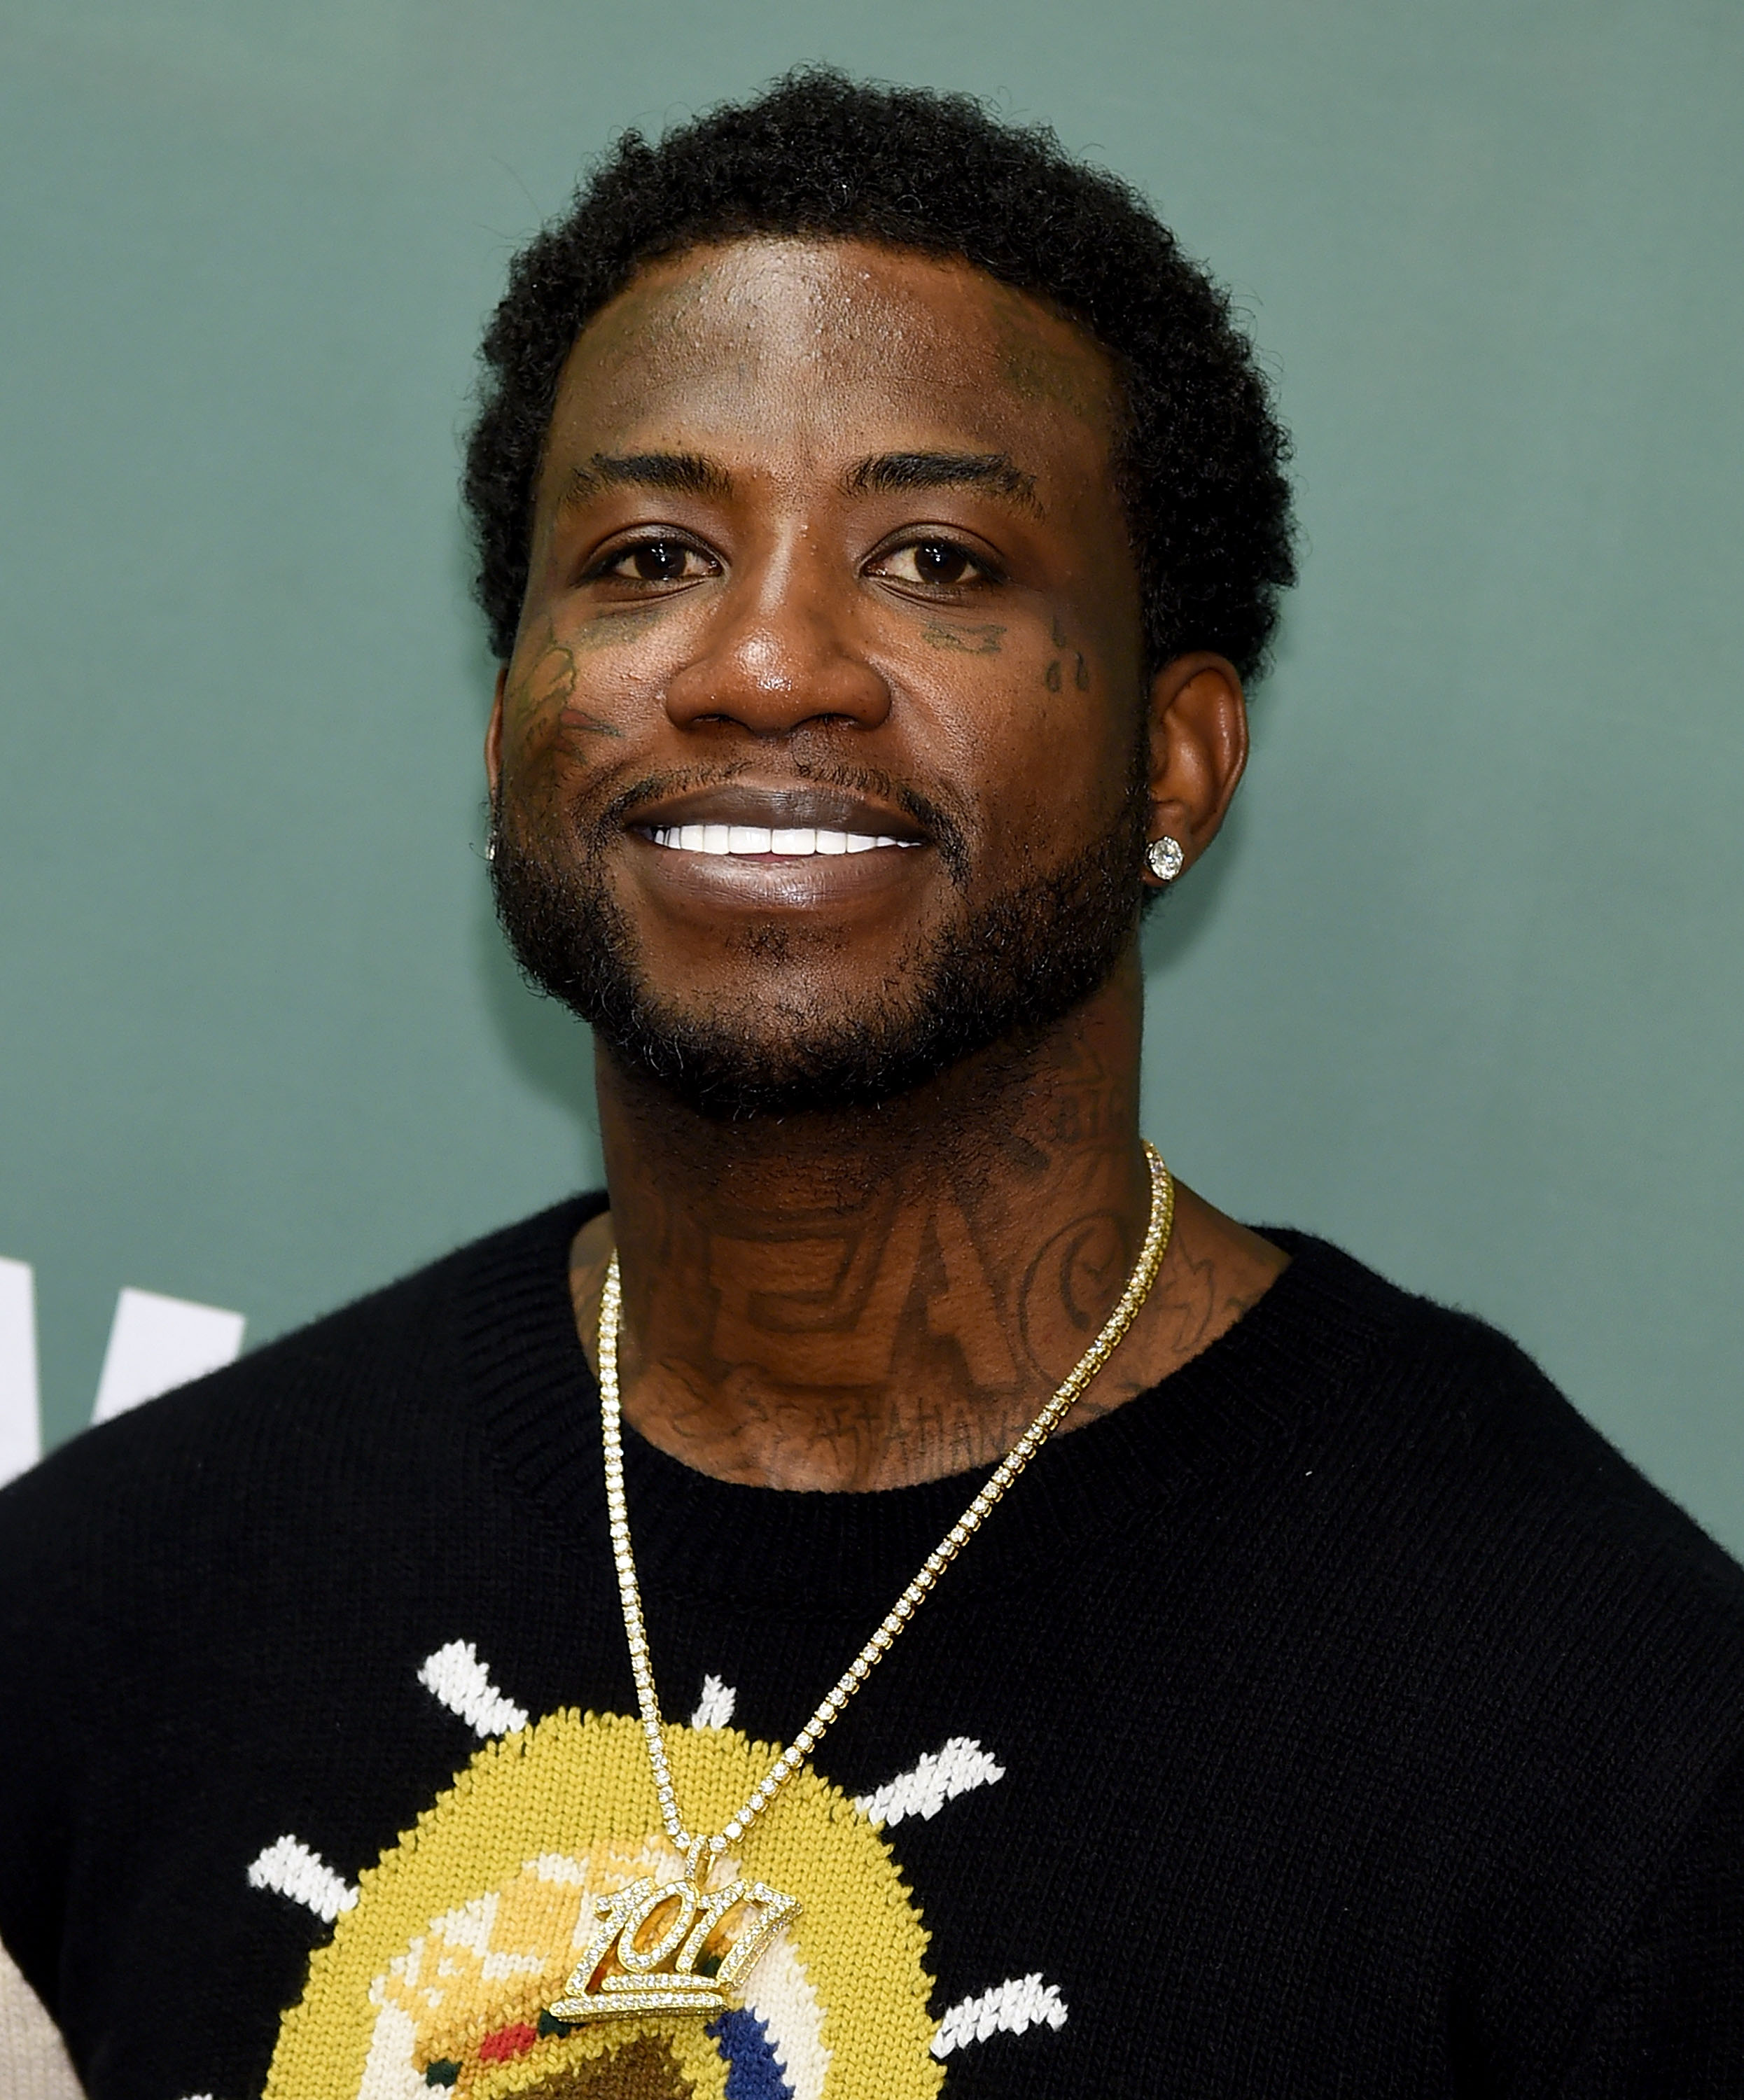 Gucci Mane Steps Down From His Throne